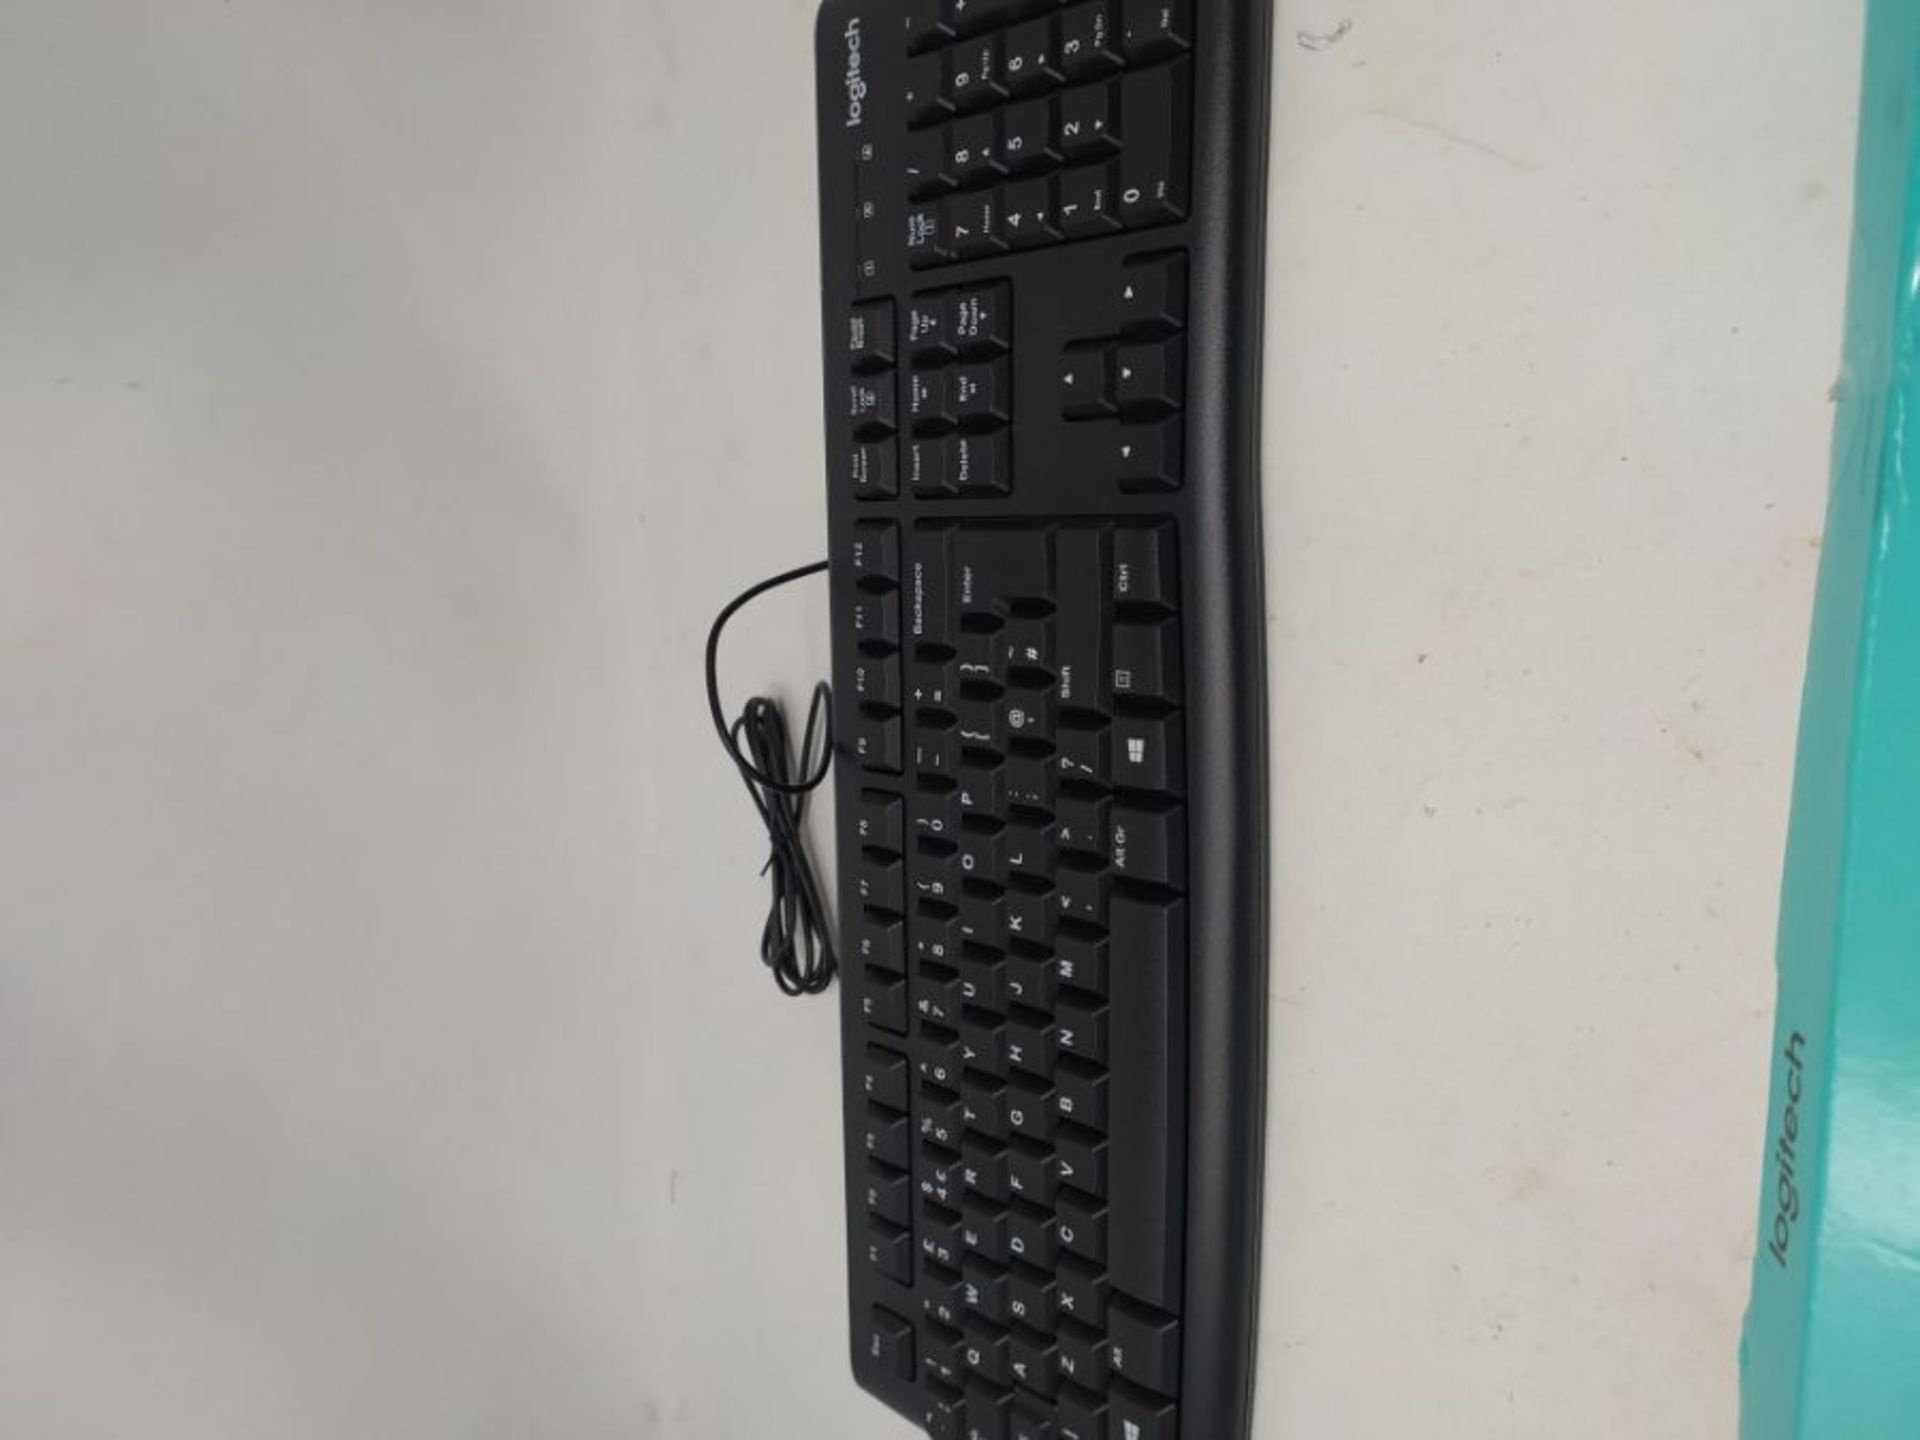 Logitech K120 Wired Keyboard for Windows, USB Plug-and-Play, Full-Size, Spill Resistan - Image 2 of 2